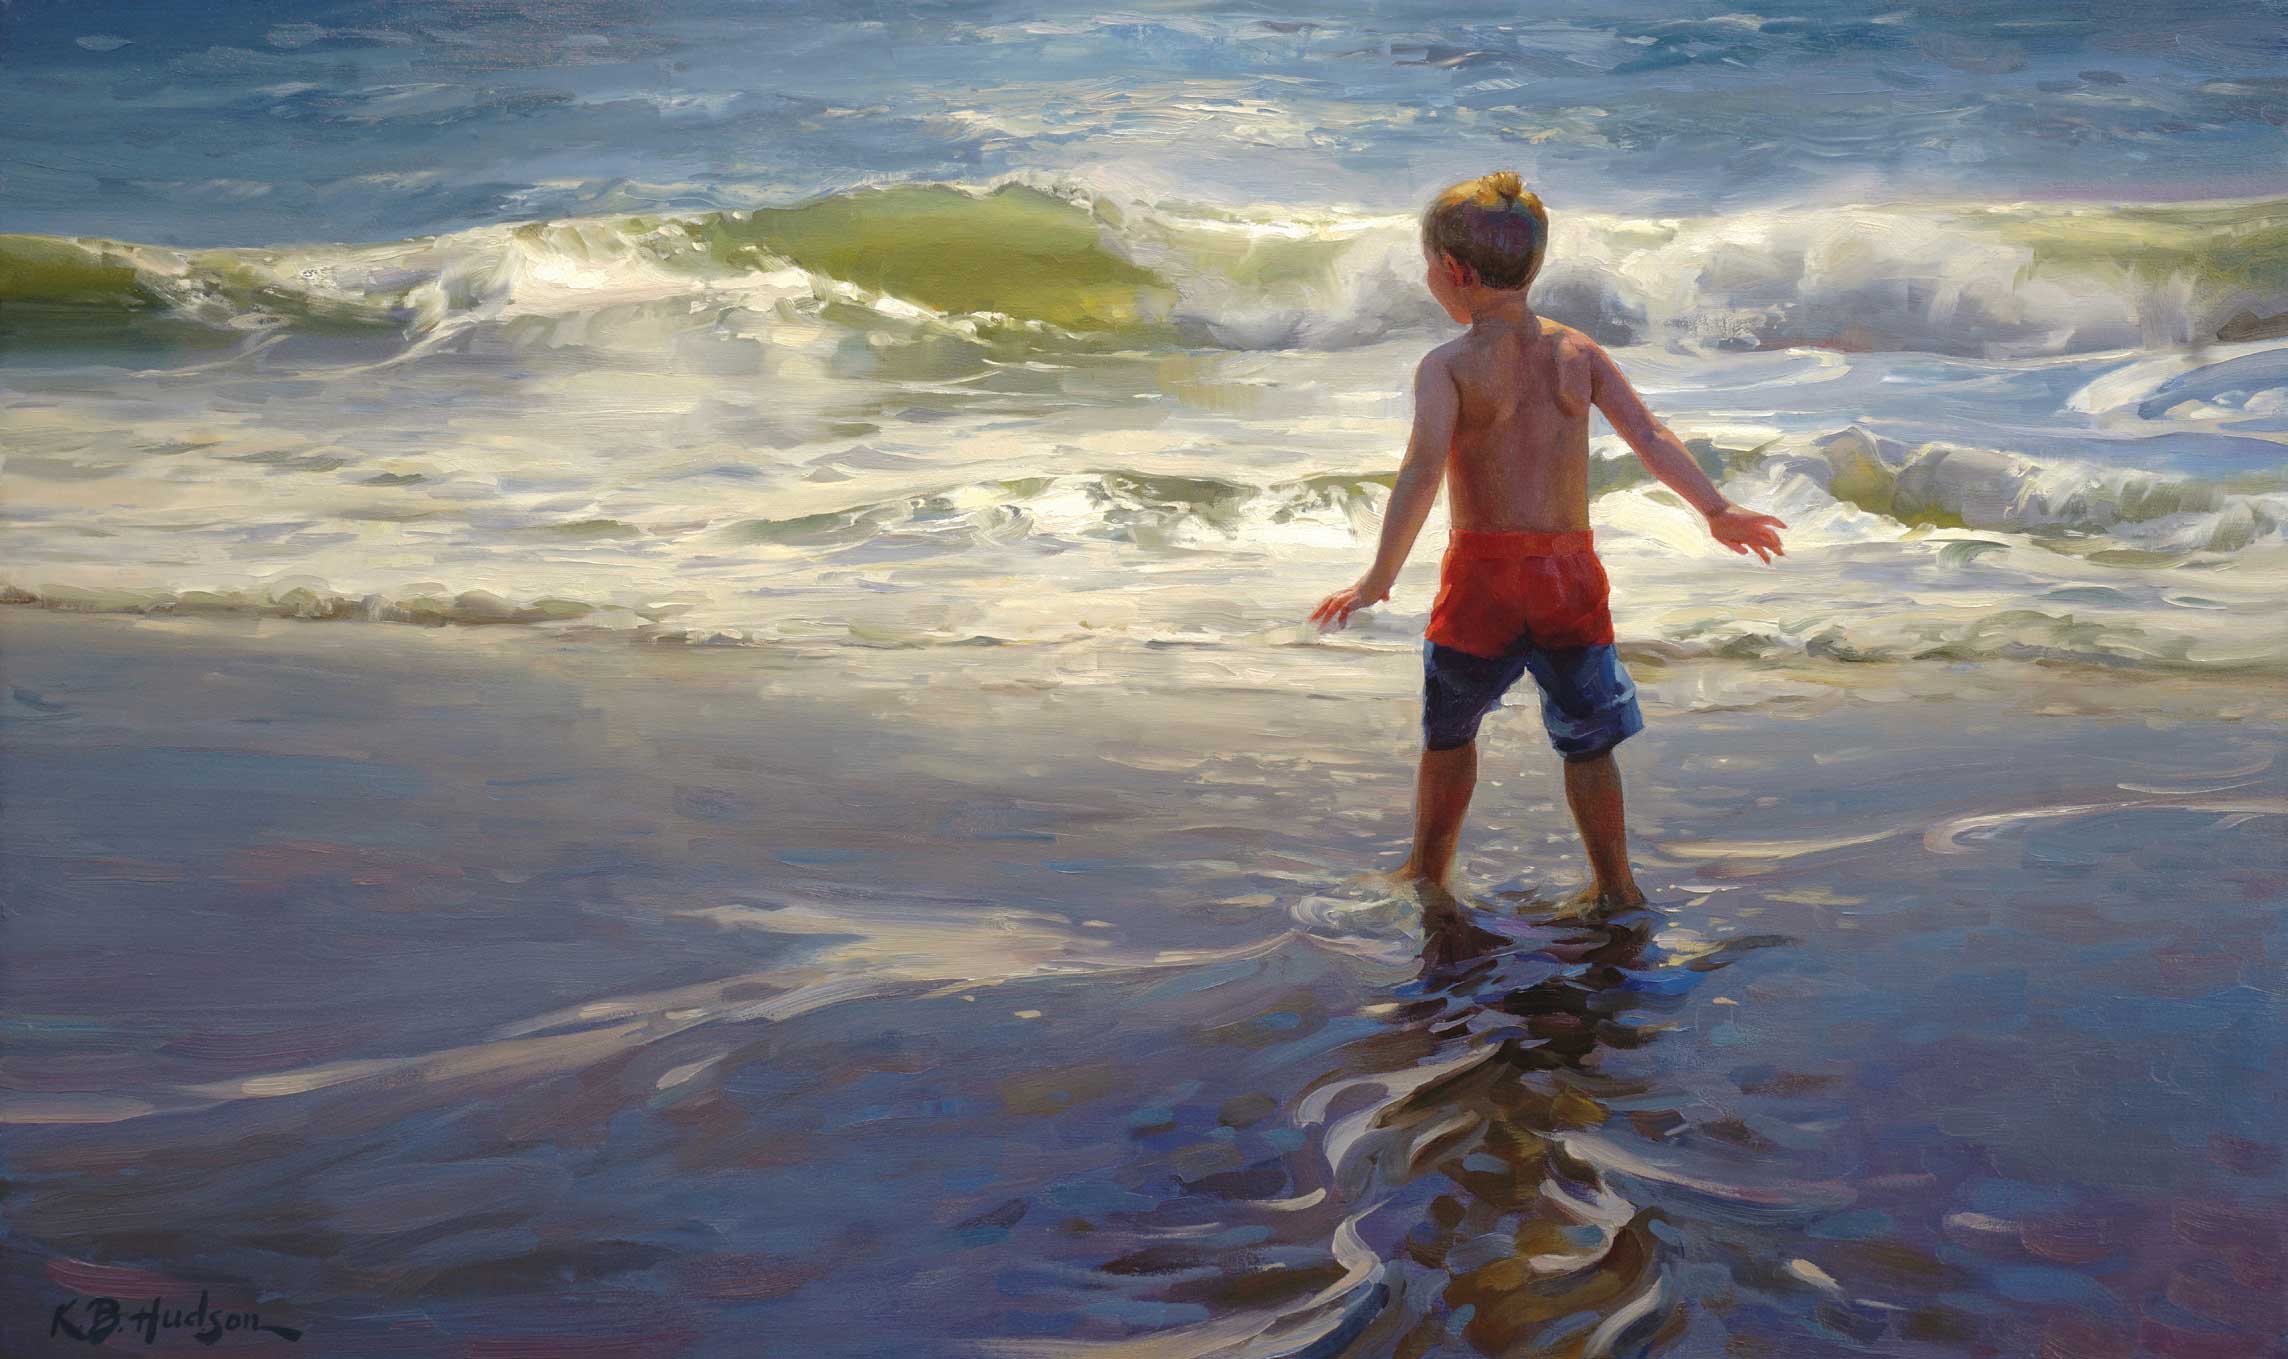 Kathleen Hudson, "When My Son Beheld the Sea," 2018, oil, 24 x 40 in., Collection the artist, Studio